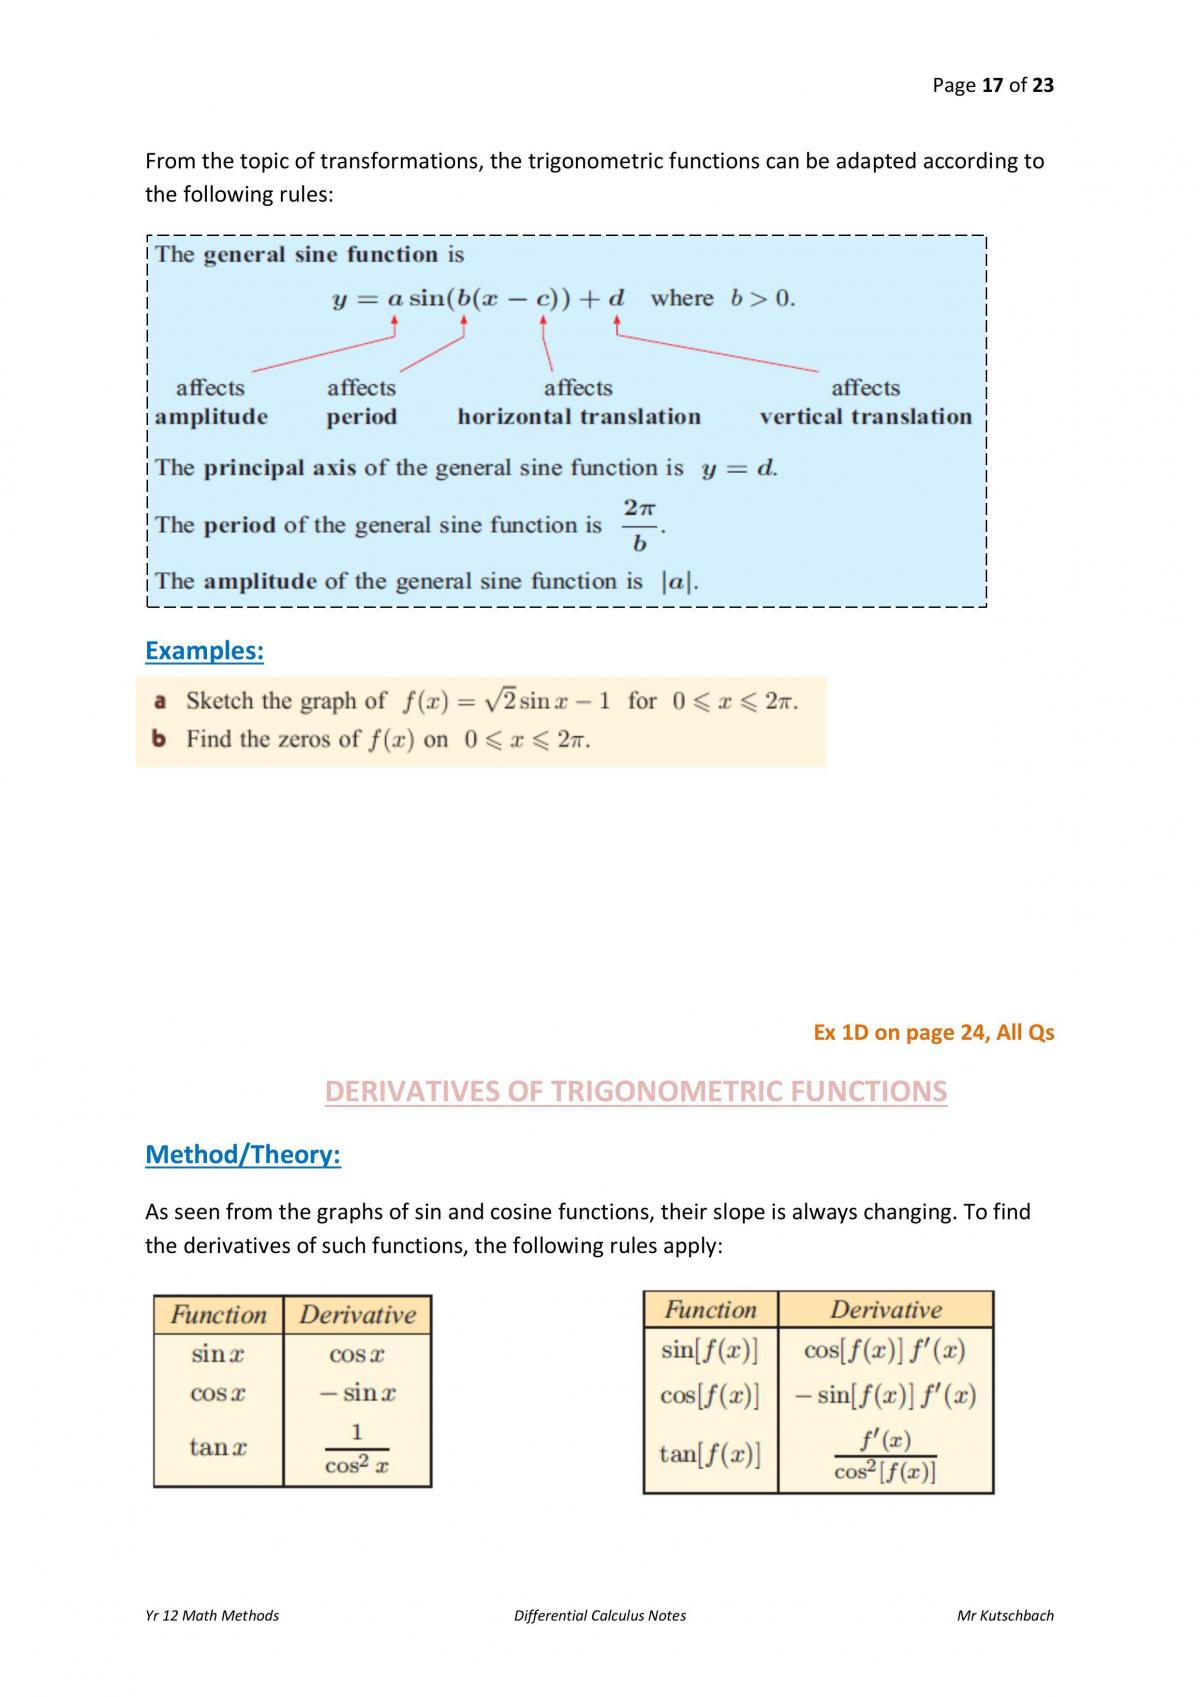 Differential Calculus Notes - Page 17